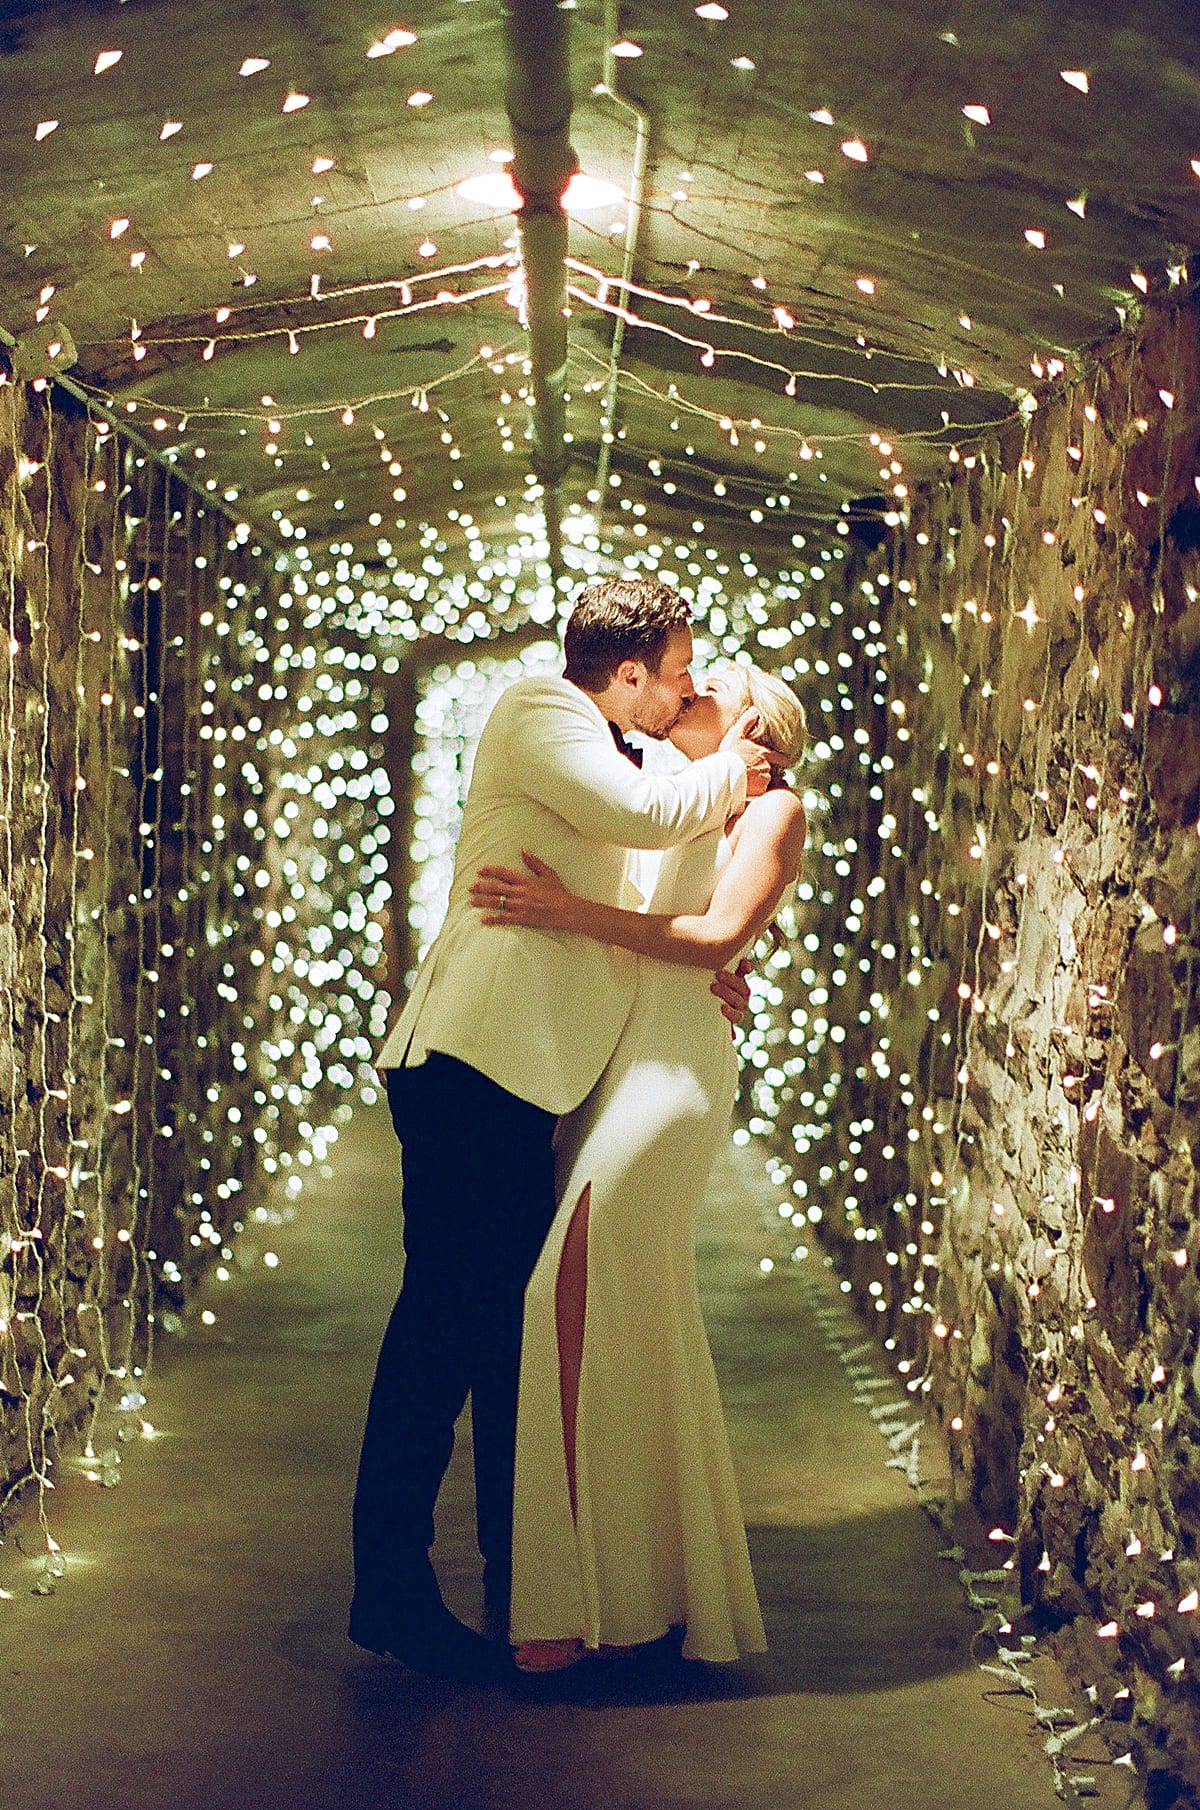 Biltmore Champagne Cellar Wedding Bride and Groom Kissing in Tunnel Photo